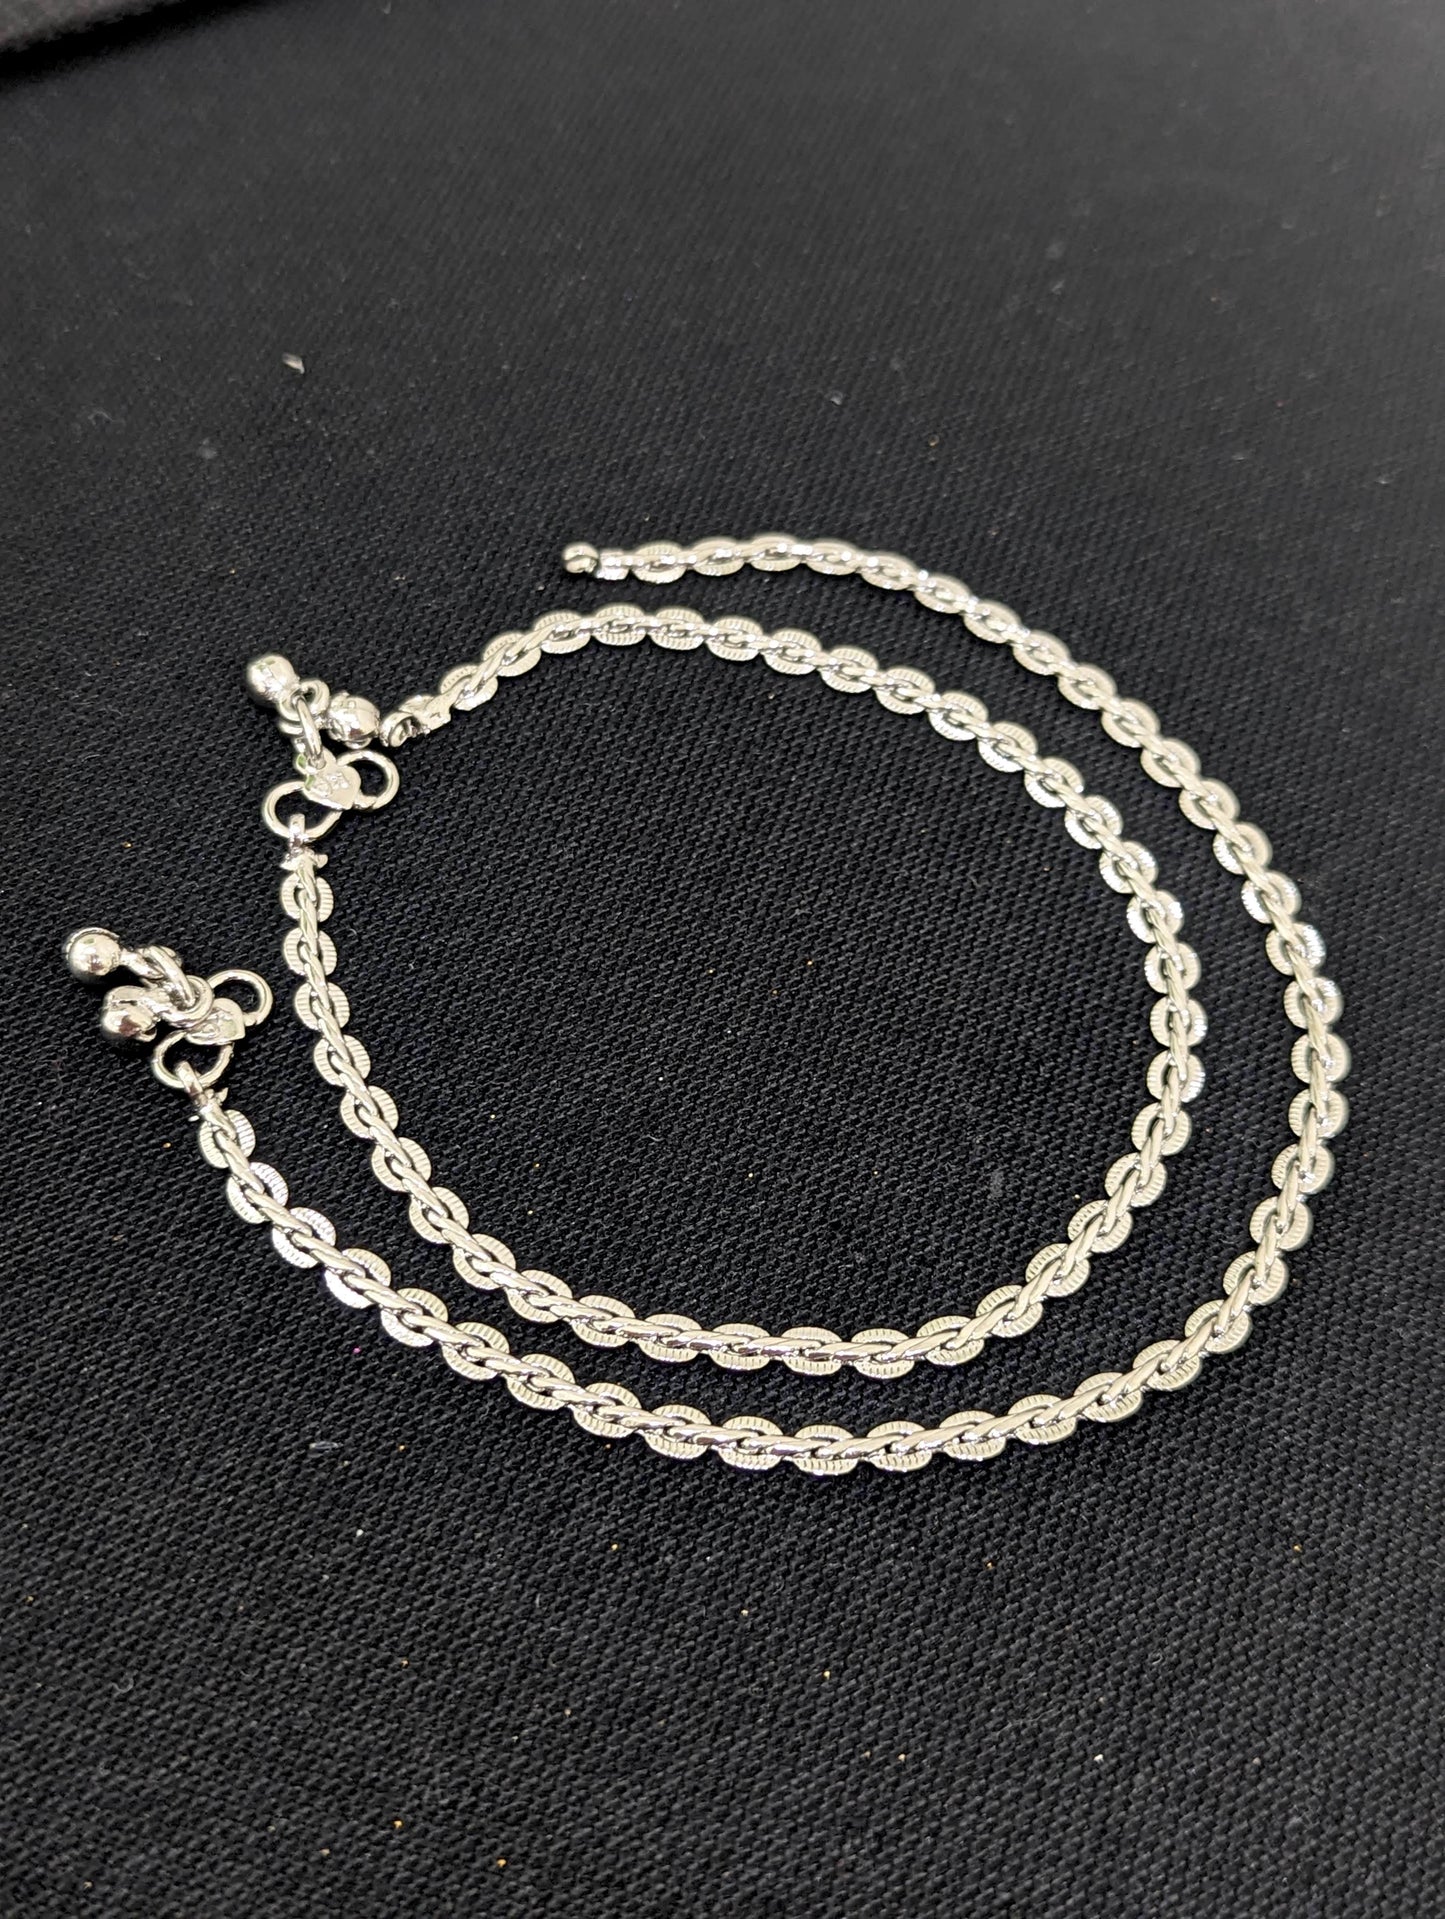 Rhodium Silver plated Anklets - Design 1